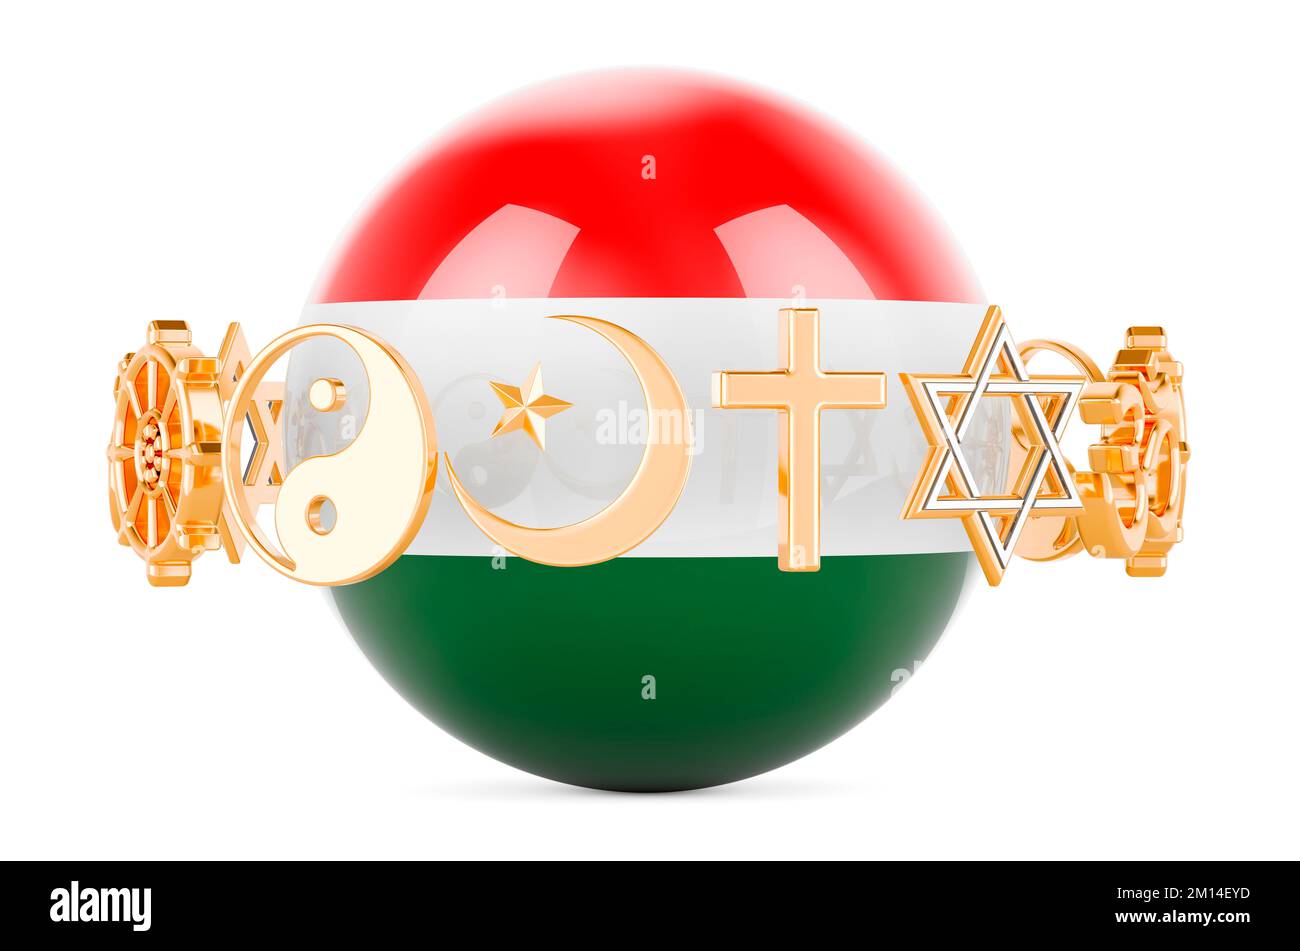 Hungarian flag painted on sphere with religions symbols around, 3D rendering isolated on white background Stock Photo